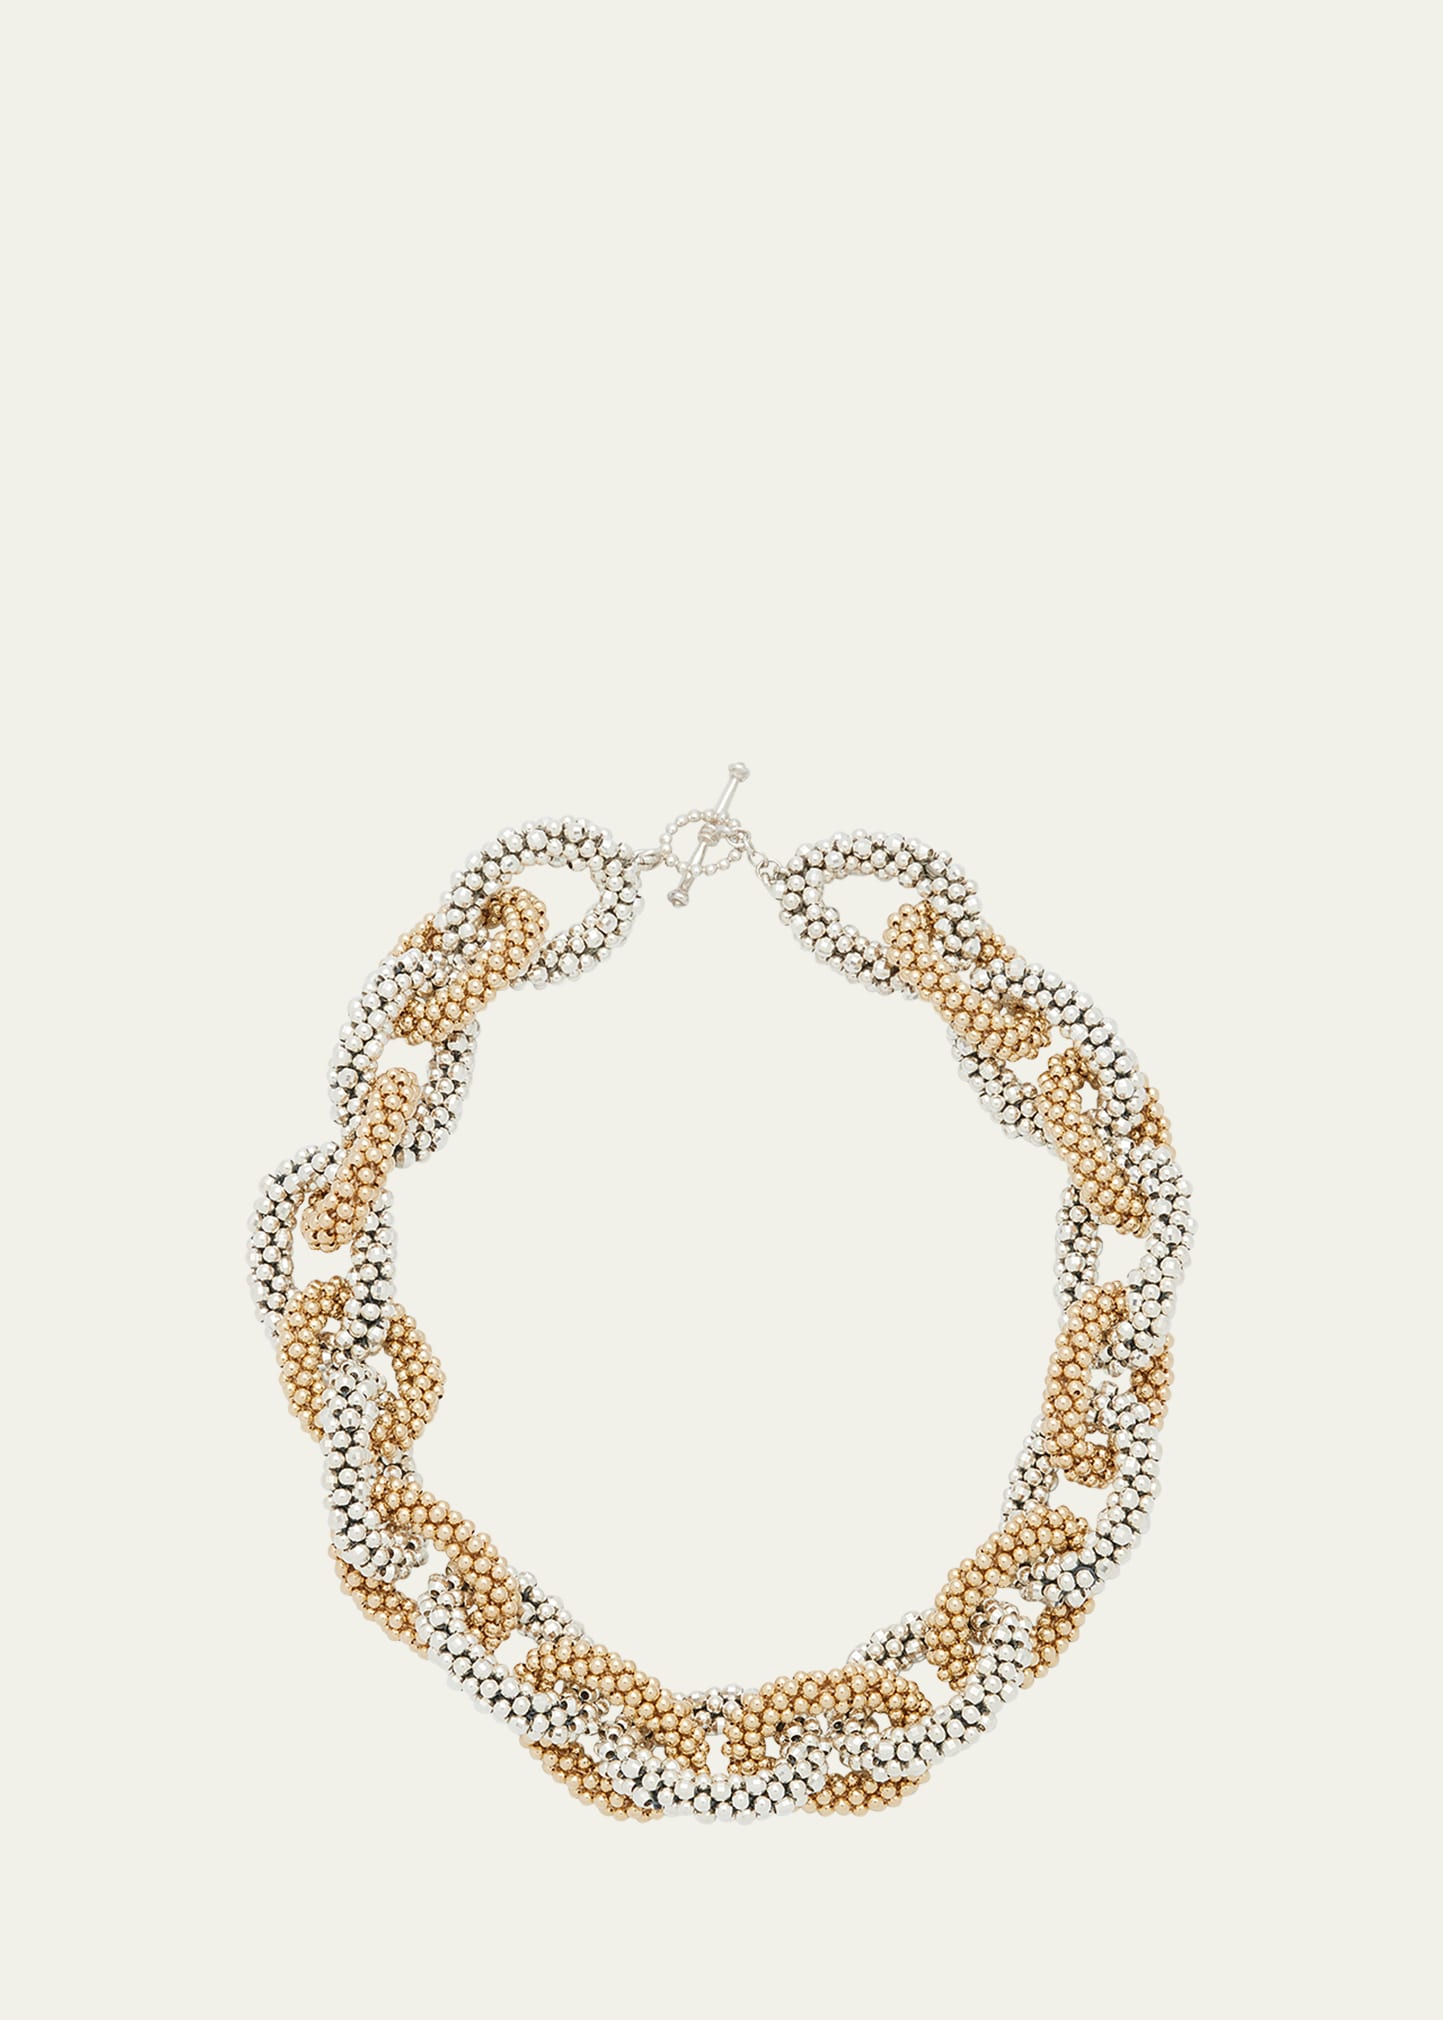 Meredith Frederick Sterling Silver and 14K Gold Link Necklace